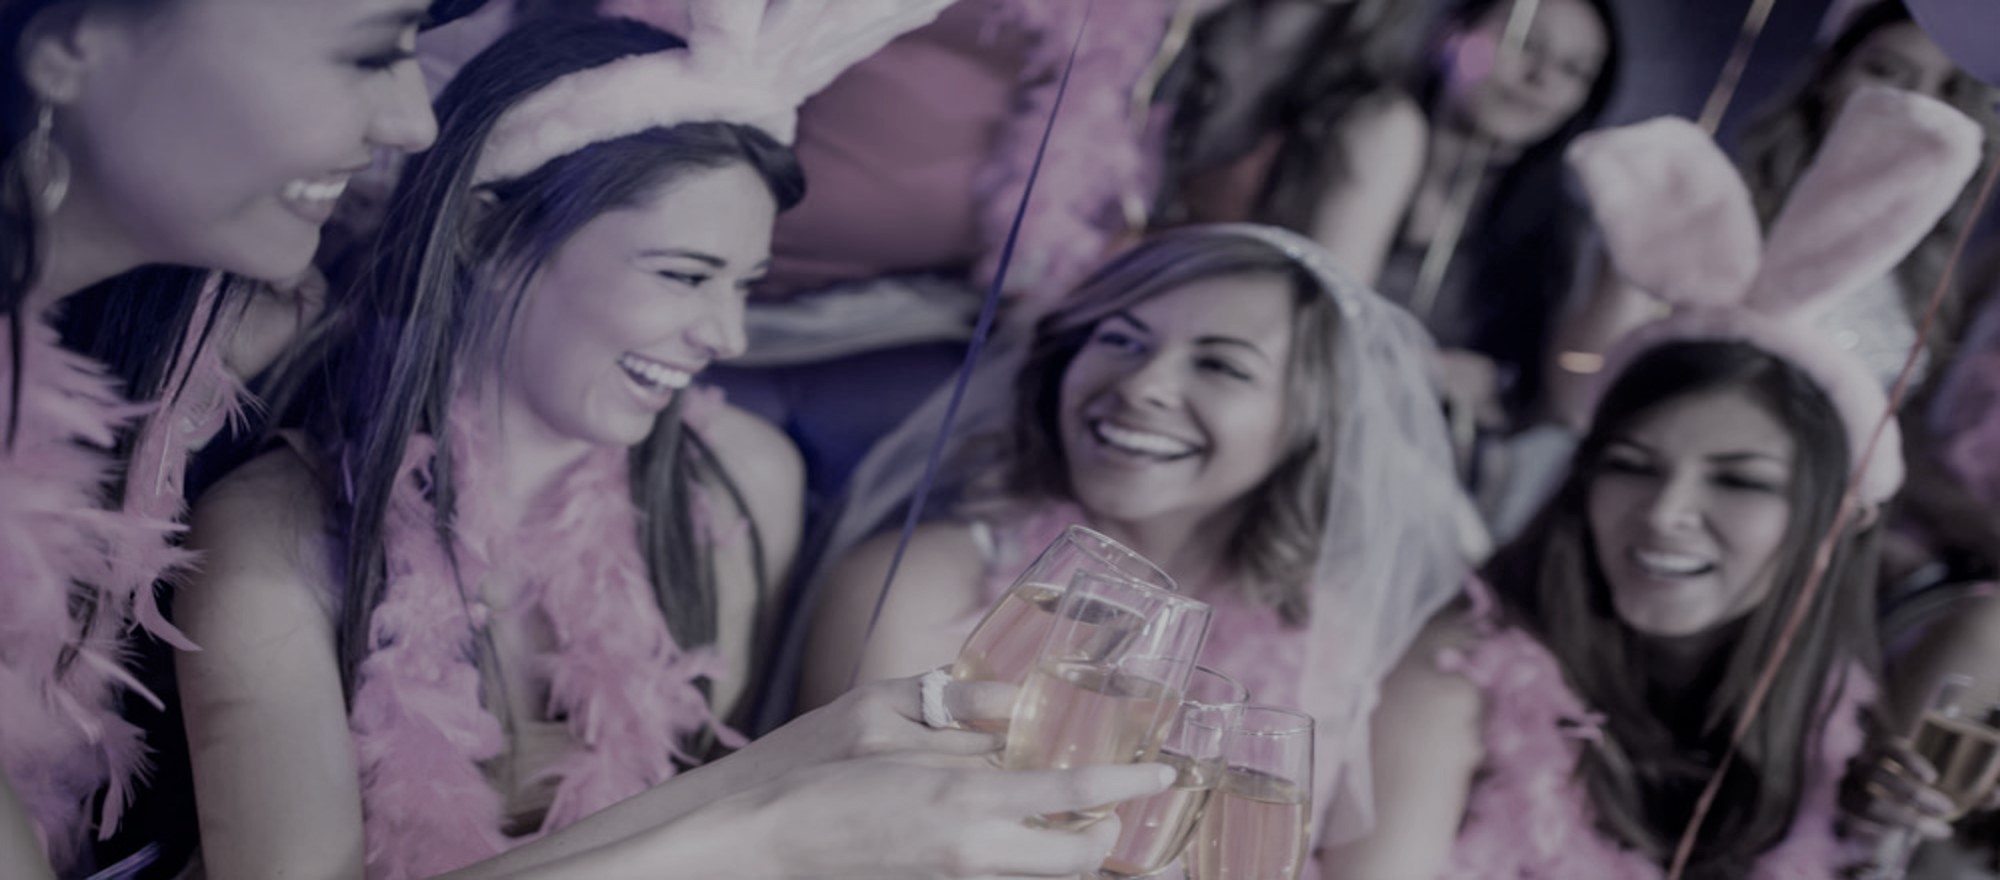 Hens Parties and Group Events!